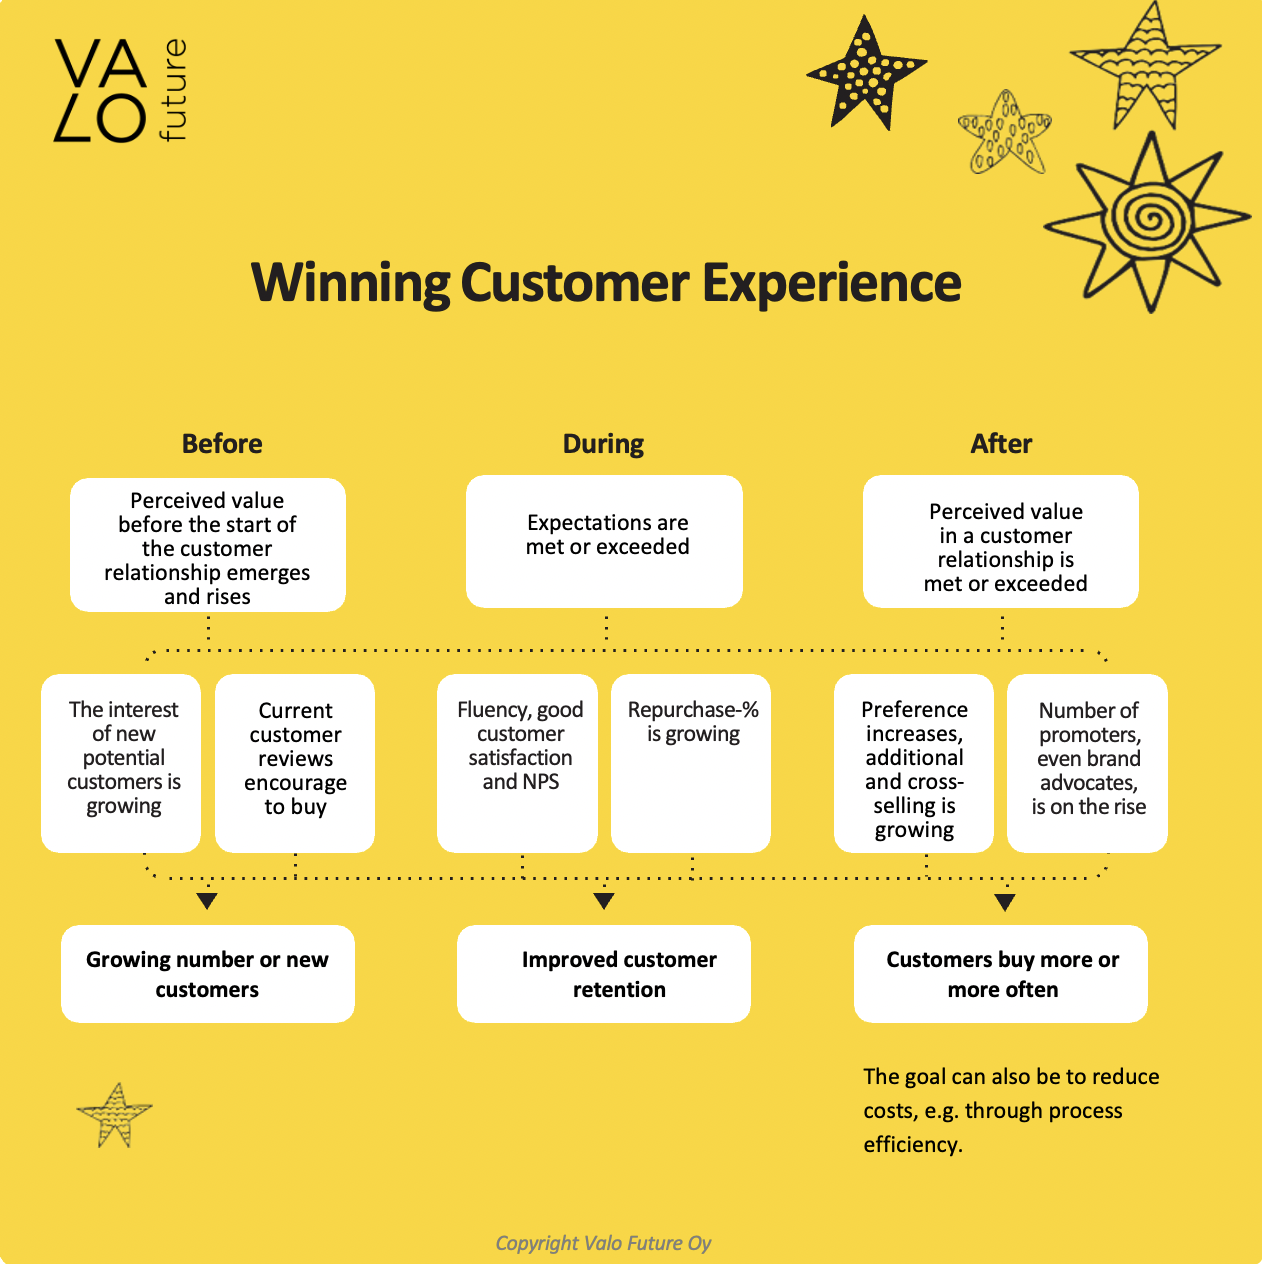 How to measure Customer Experience